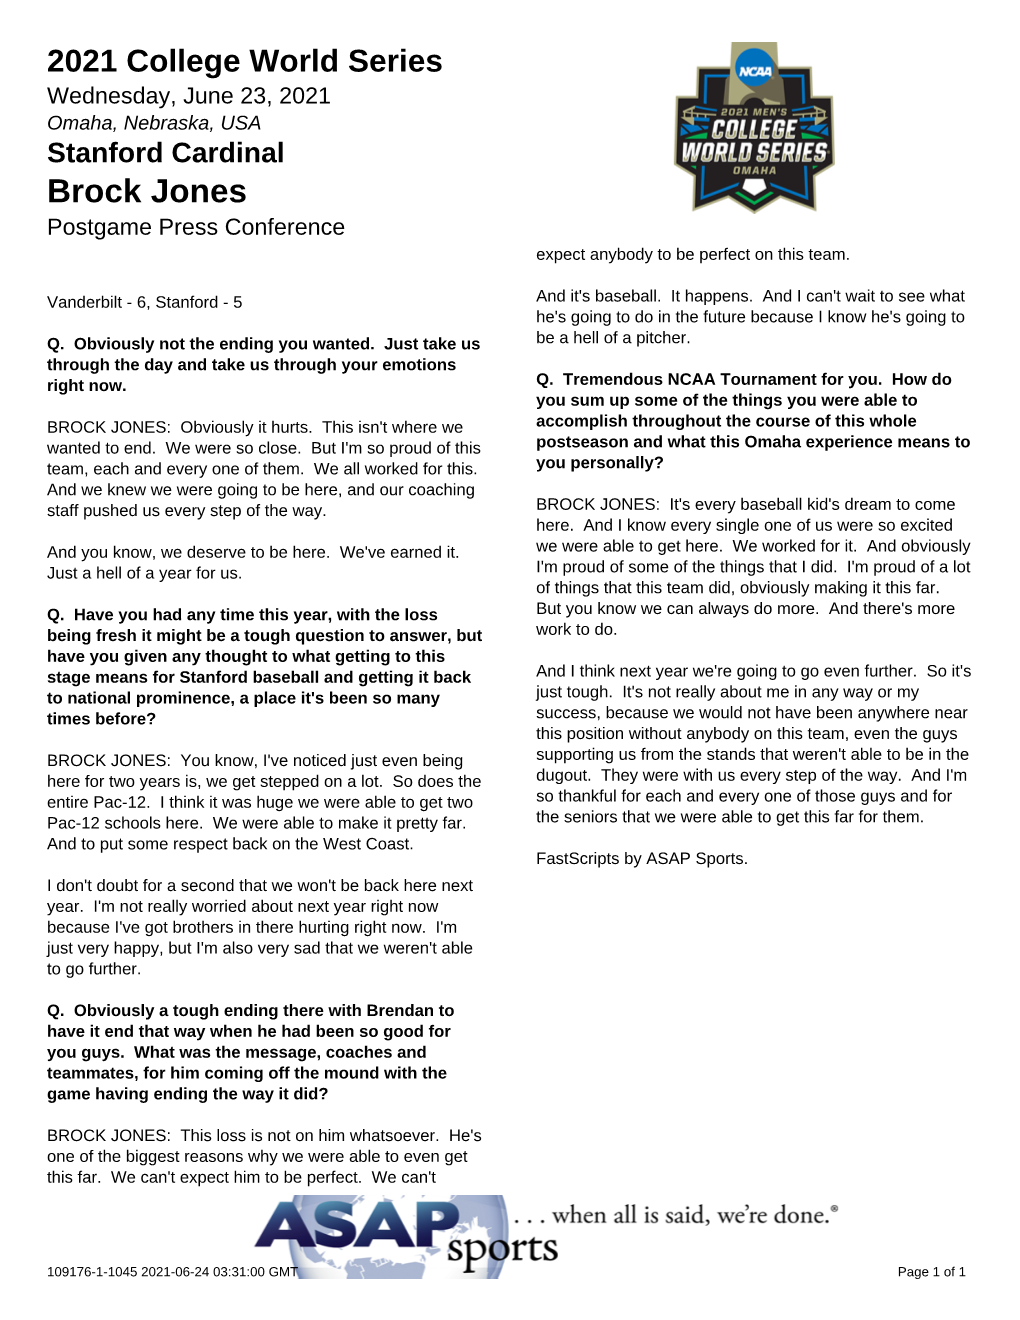 Stanford Cardinal Brock Jones Postgame Press Conference Expect Anybody to Be Perfect on This Team